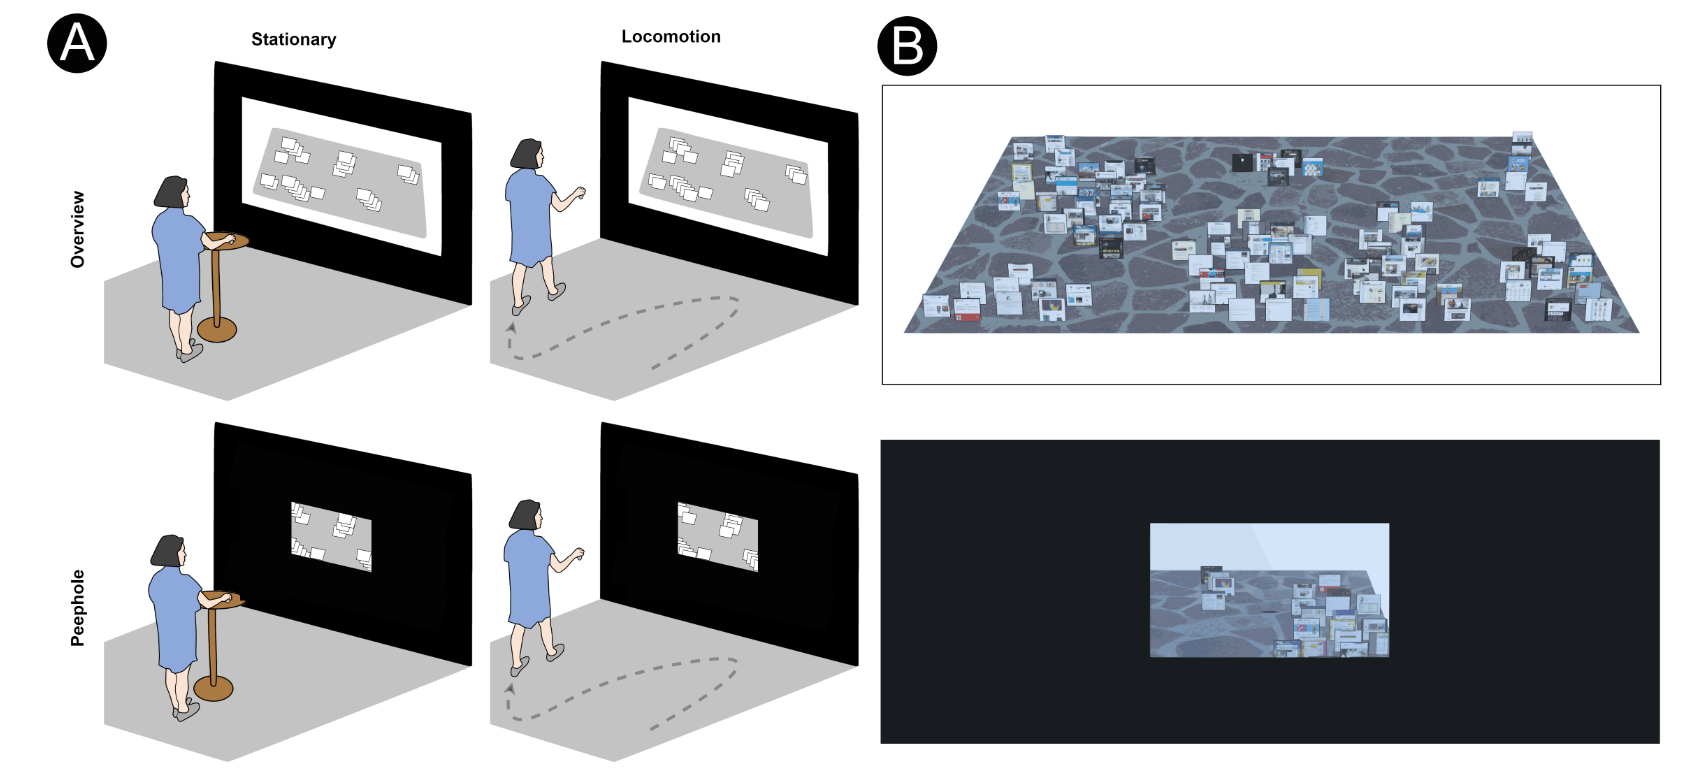  We investigate the effects of locomotion and visual overview on spatial memory. Users either walk around the room to place the objects or stand still, and have complete overview of the virtual environment or can only see a subsection of it. 